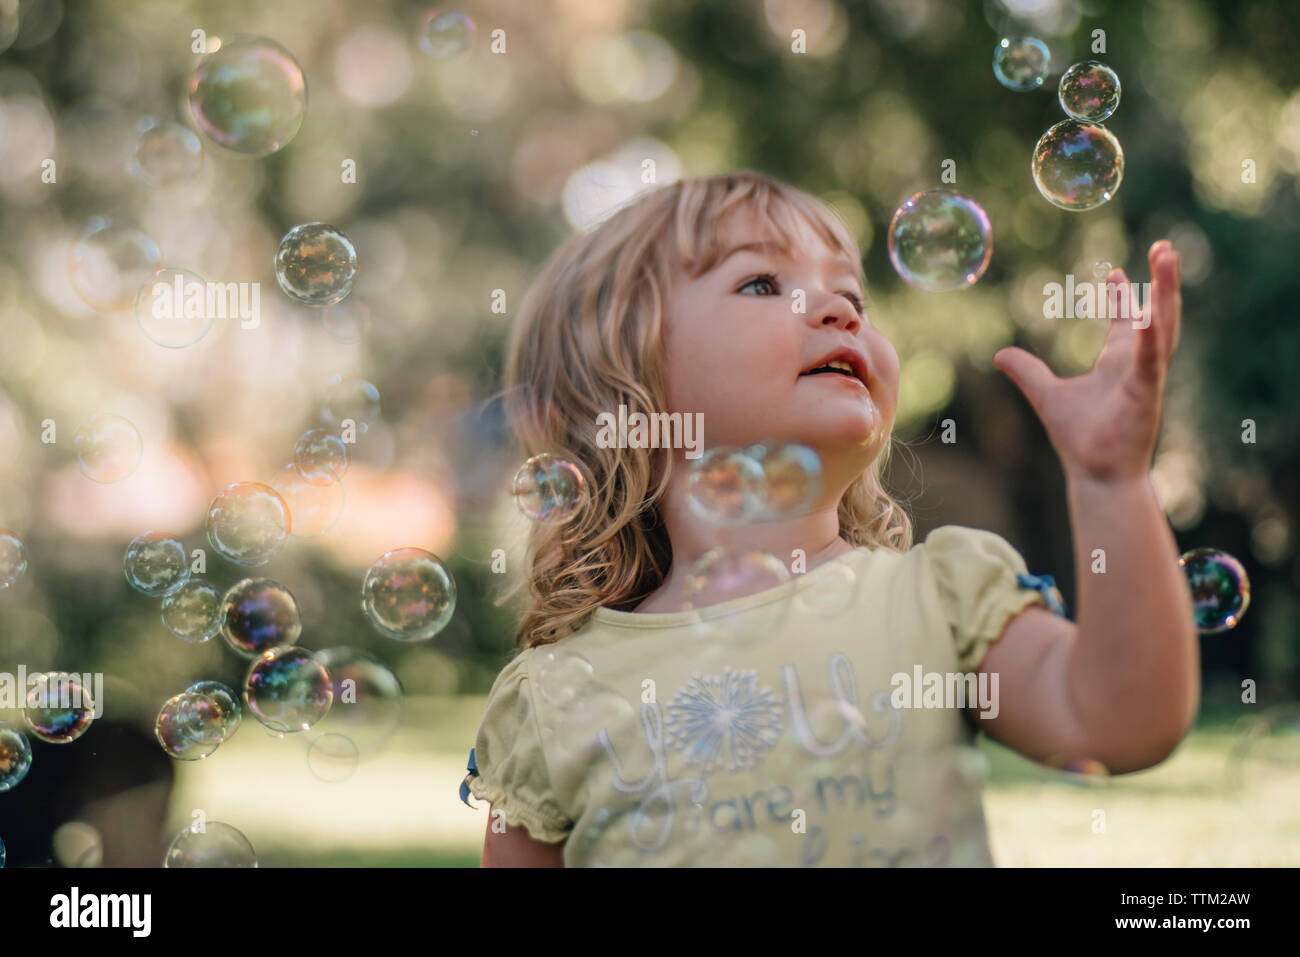 Cute baby girl reaching for bubbles flying in air at park Stock Photo